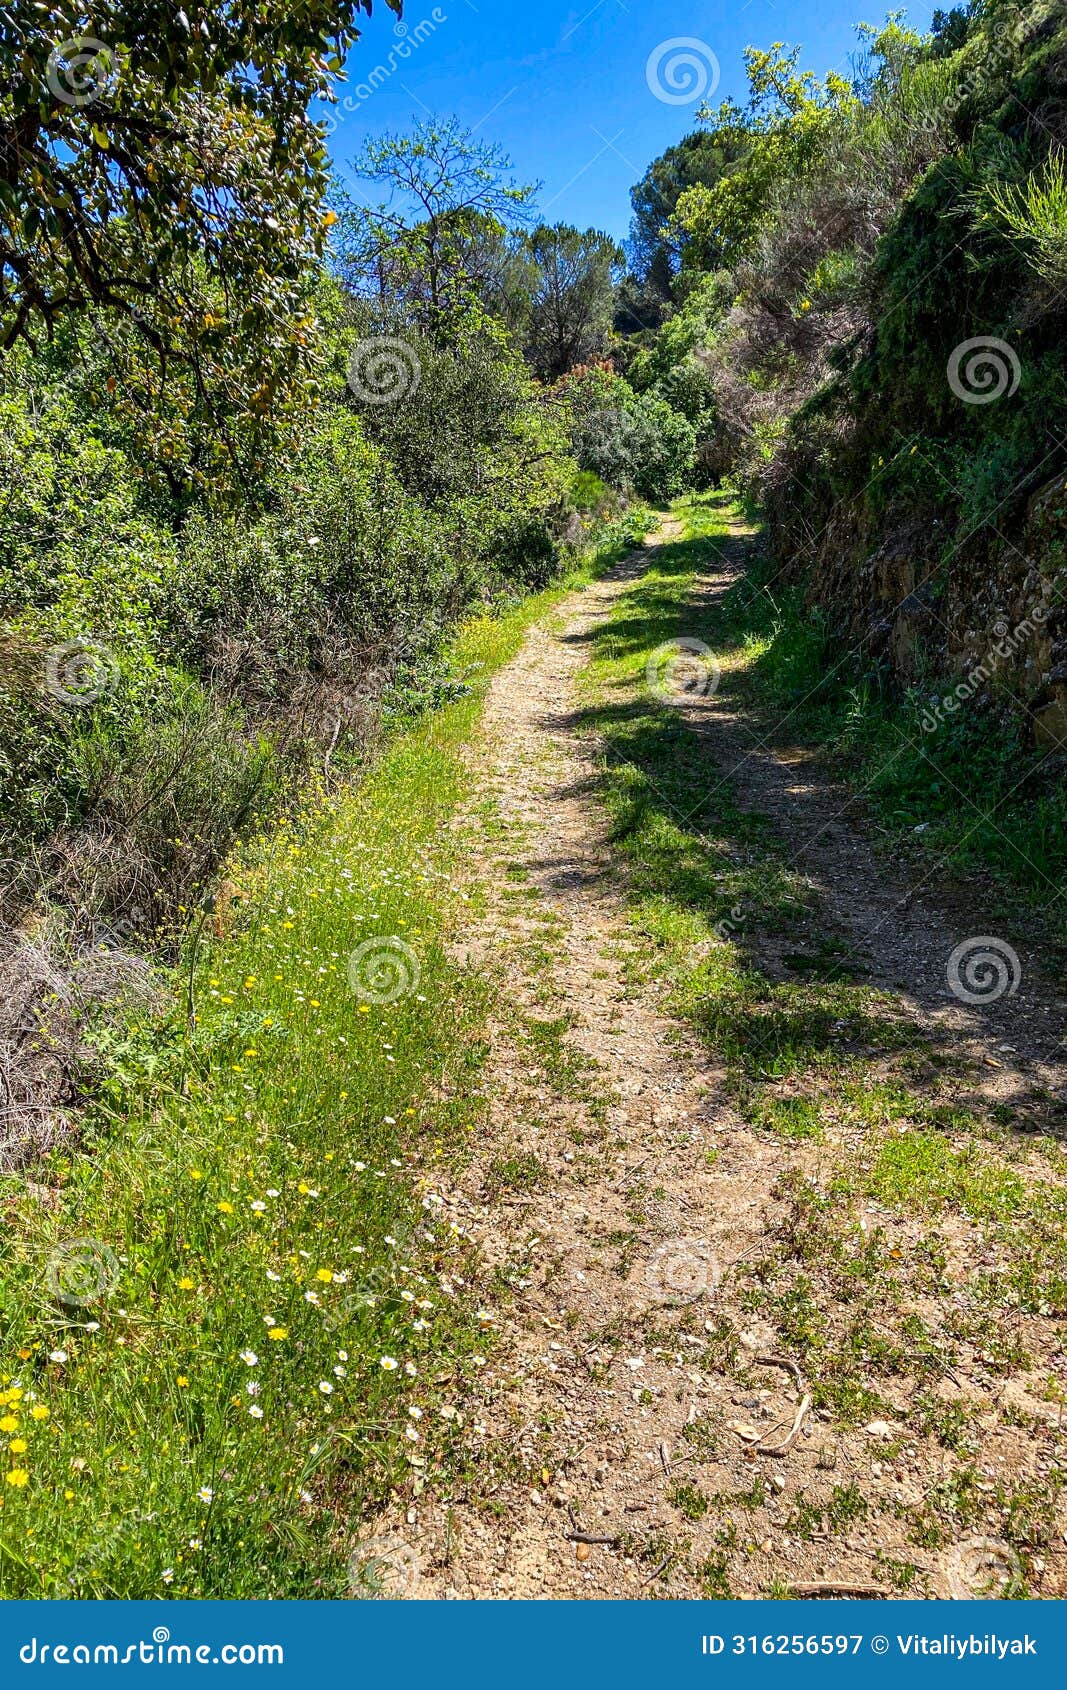 hiking trail to waterfalls over river caballos, sierra de la nieves national park in tolox, malaga